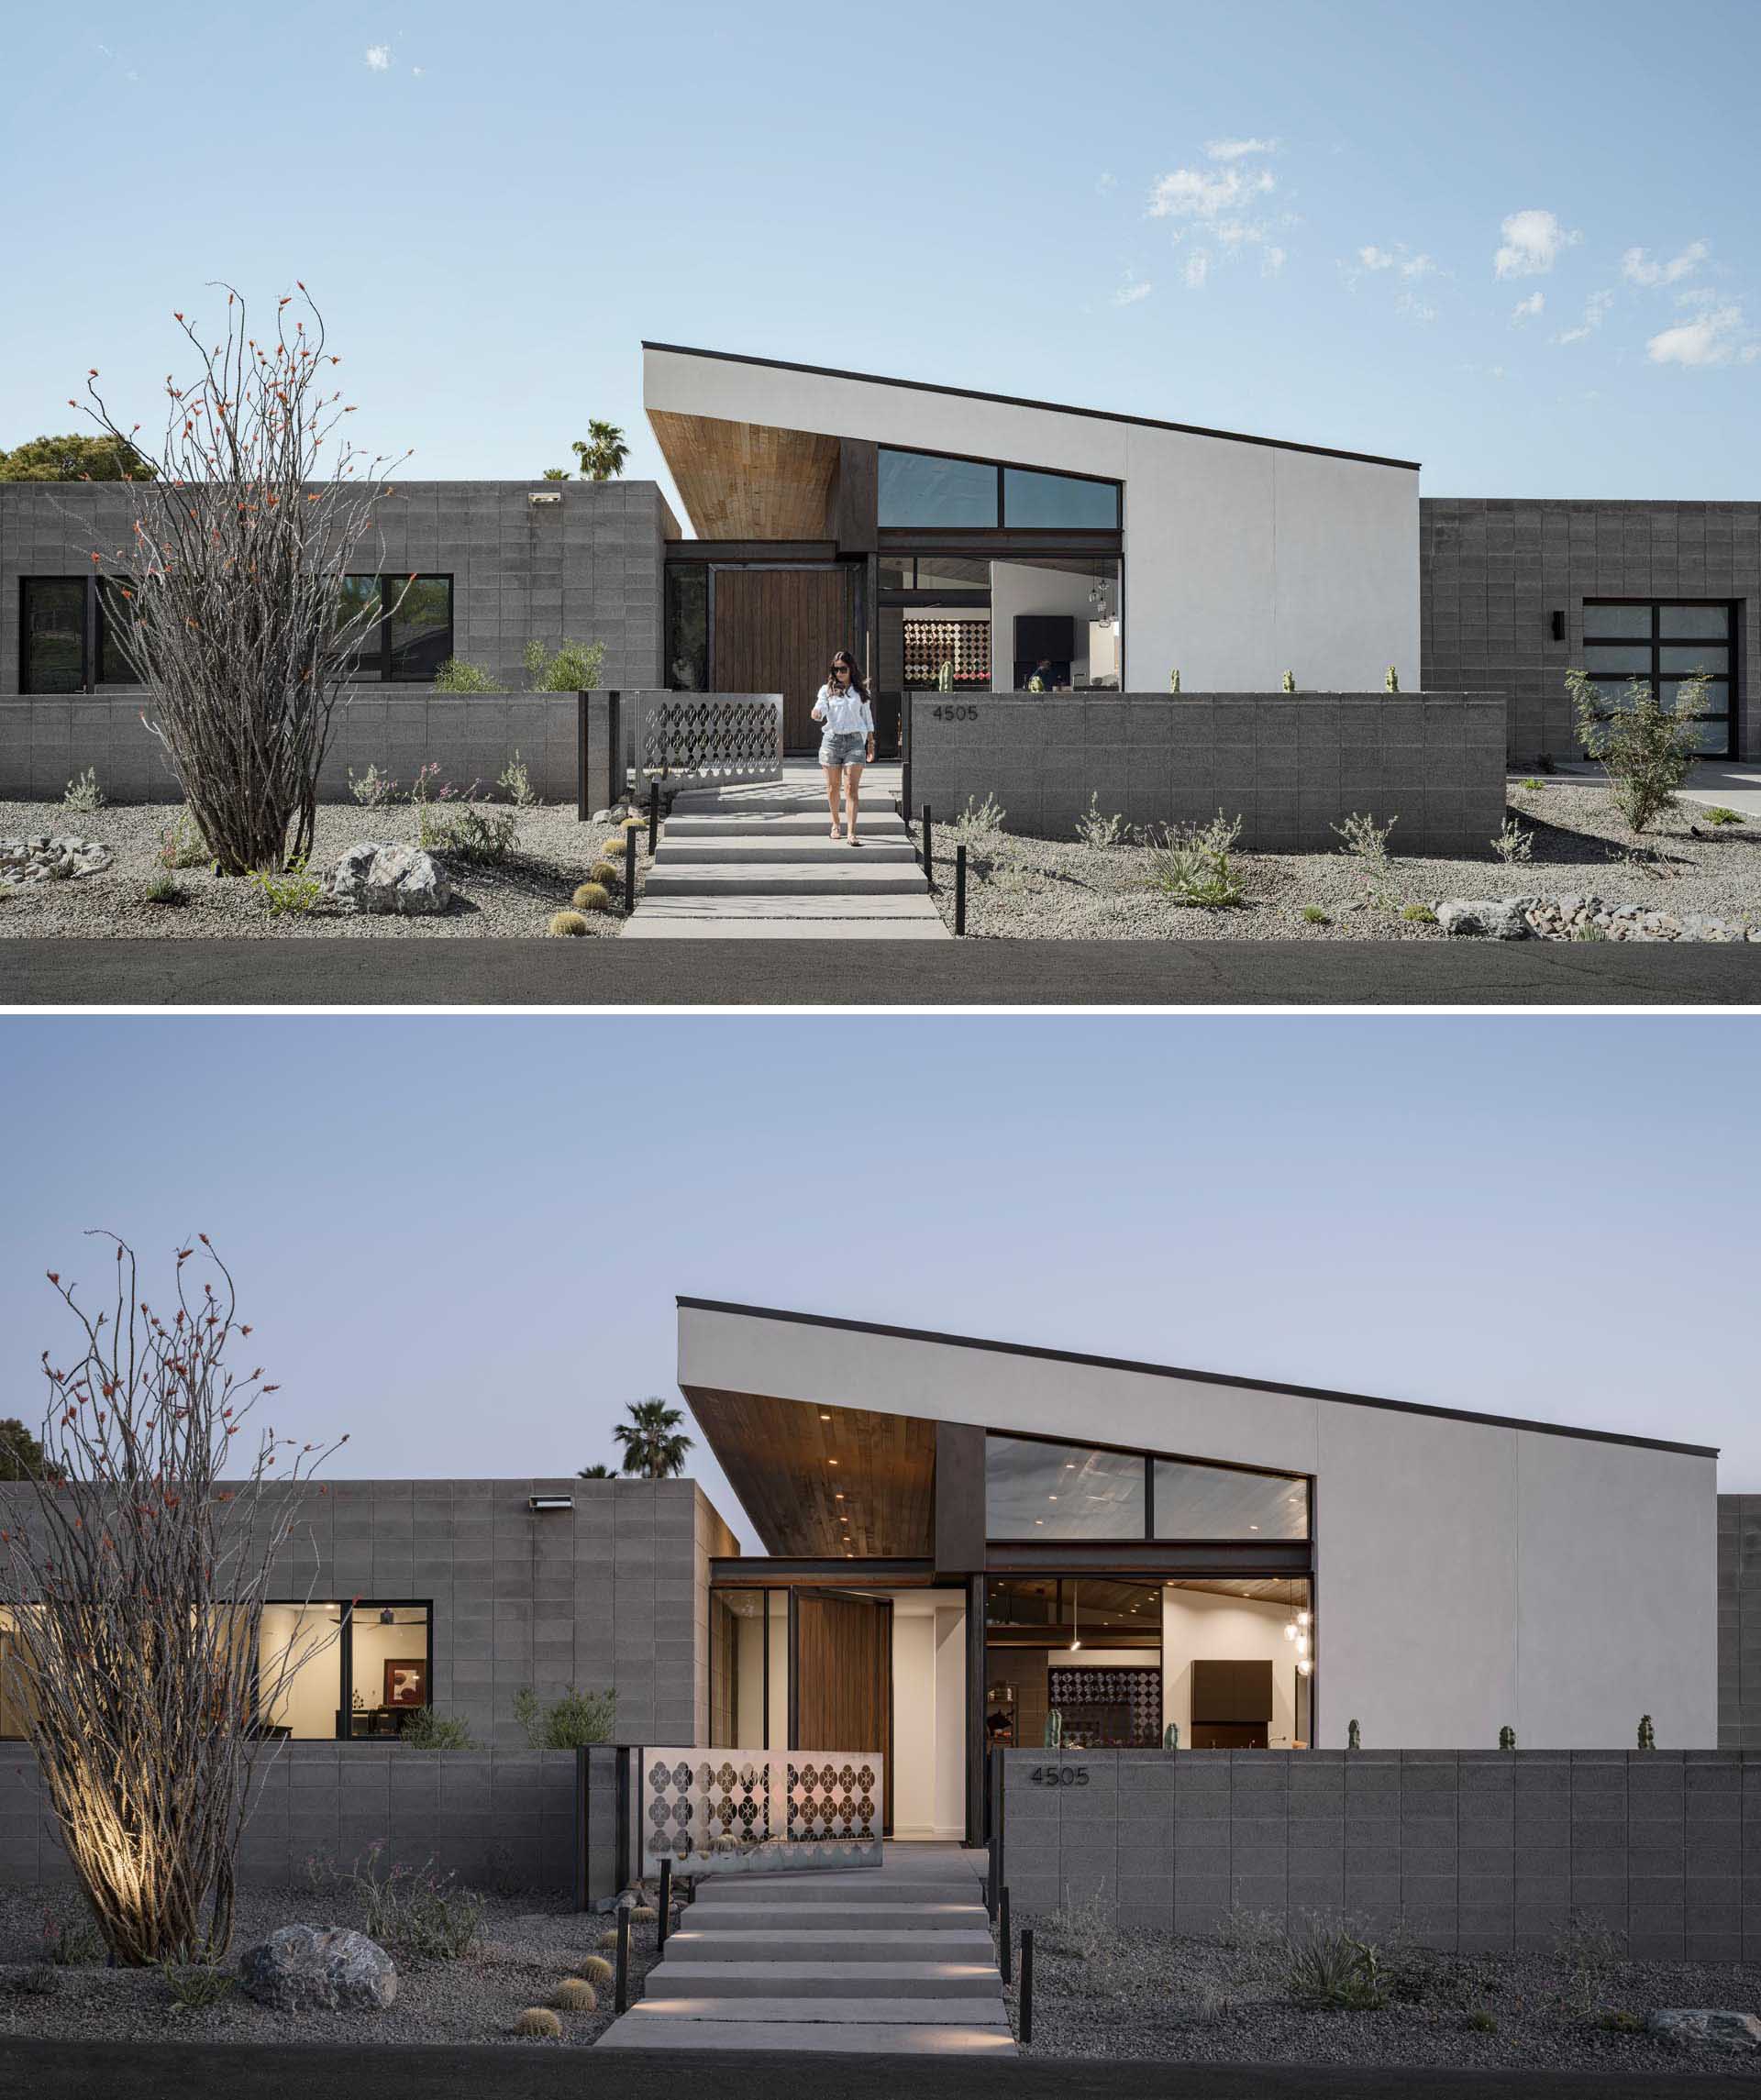 Concrete blocks are used for the walls of this modern house, as well as the low fence that surrounds a front porch.